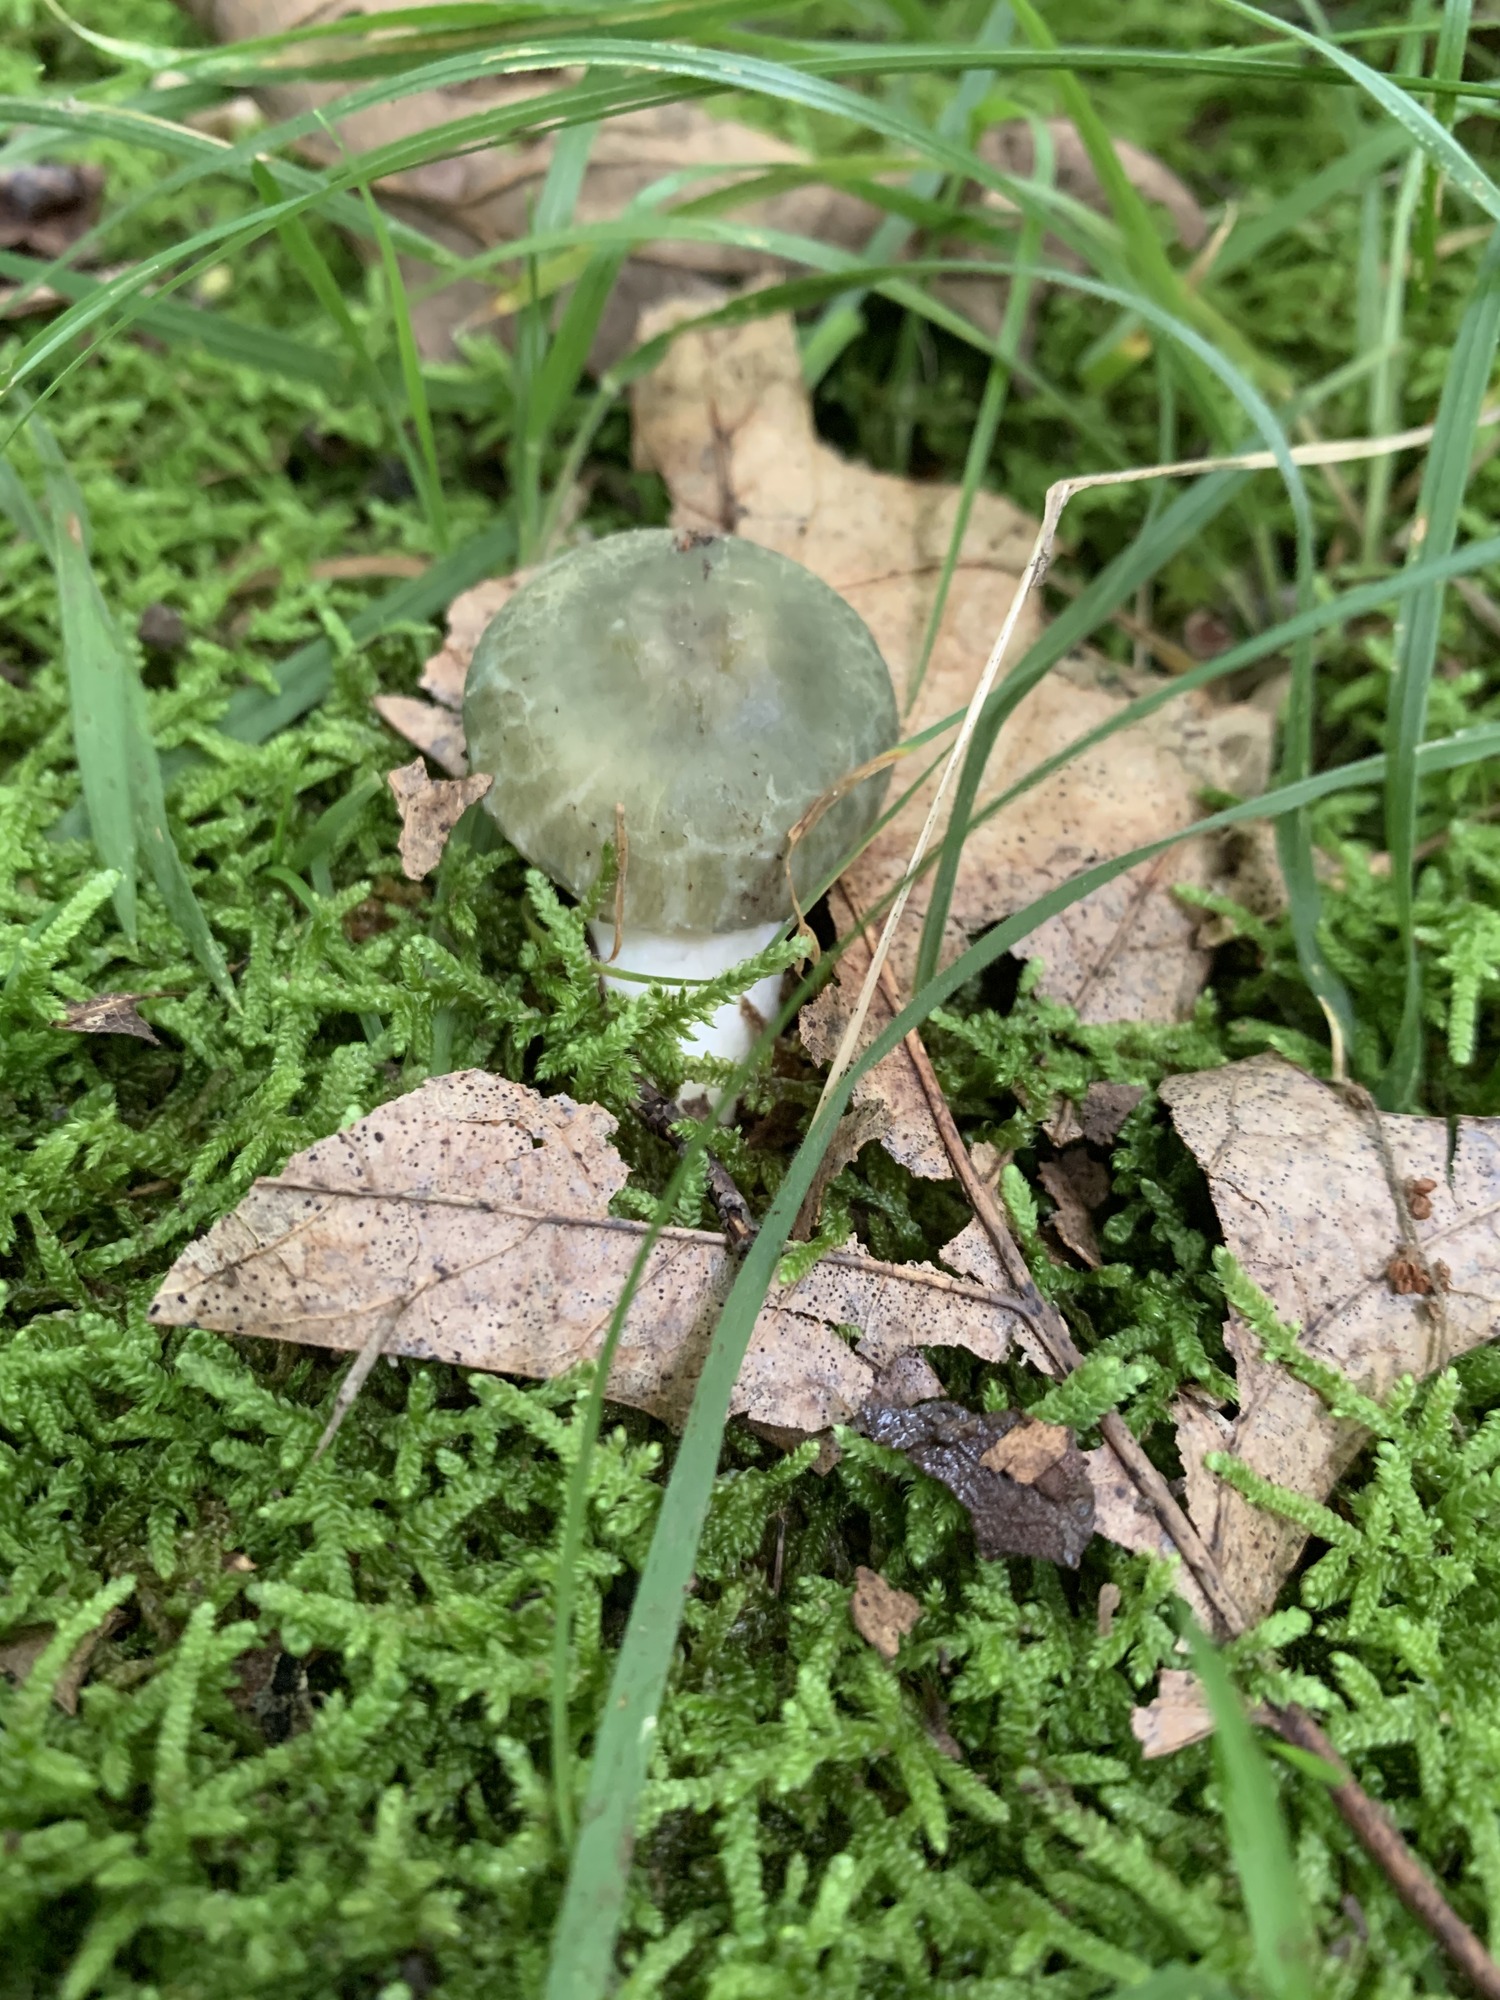 A small green capped mushroom growing in grass and moss. 